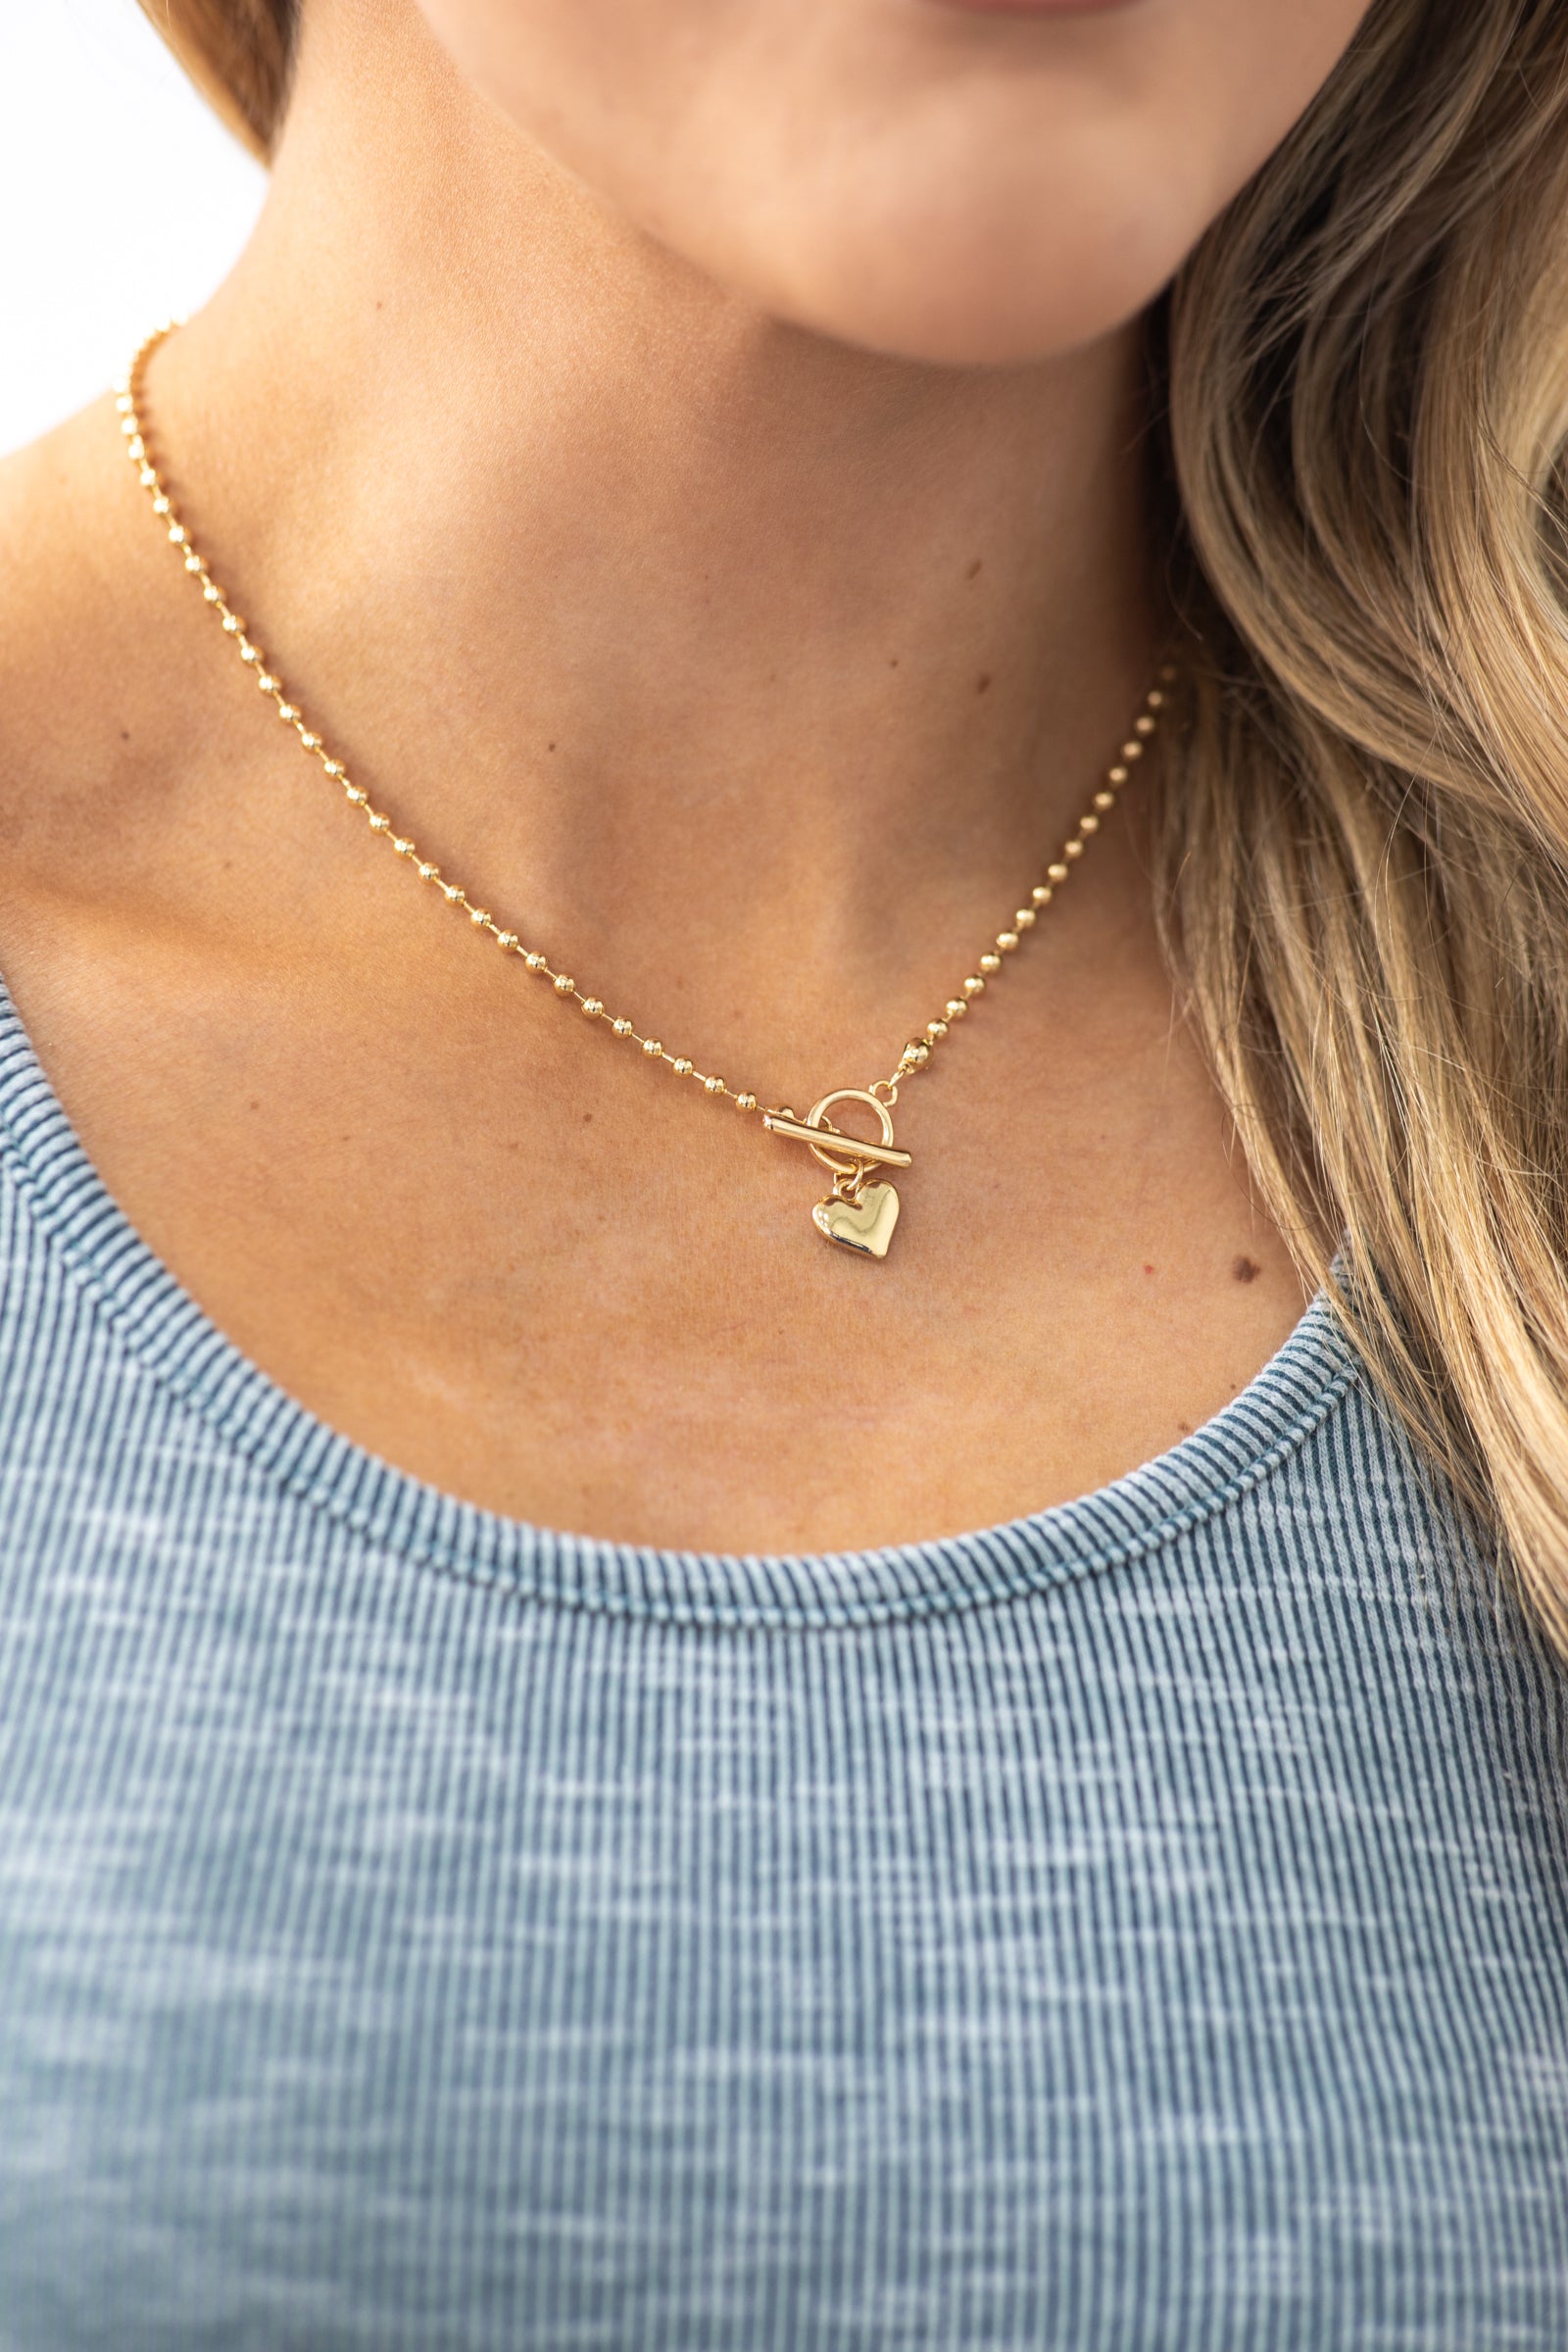 Gold Toggle Necklace With Heart Charm